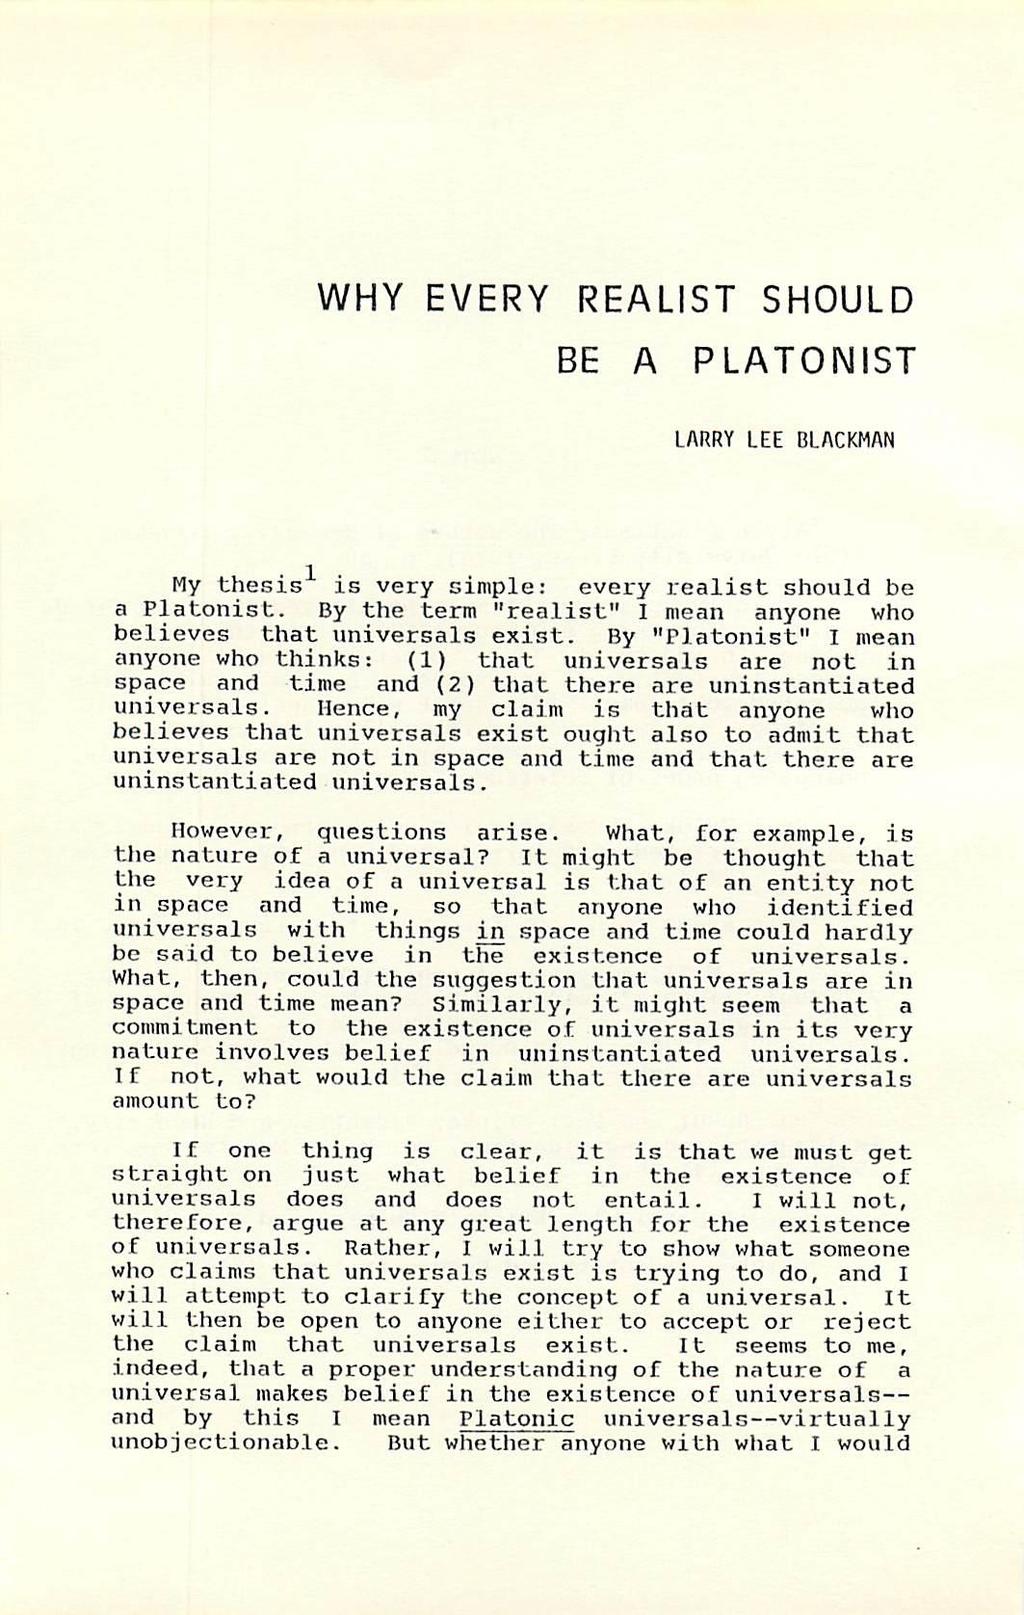 WHY EVERY REALIST SHOULD BE A PLATONIST LARRY LEE BLACKMAN My thesis 1 is very simple: every realist should be a Platonist. By the term "realist" I mean anyone who believes that universals exist.